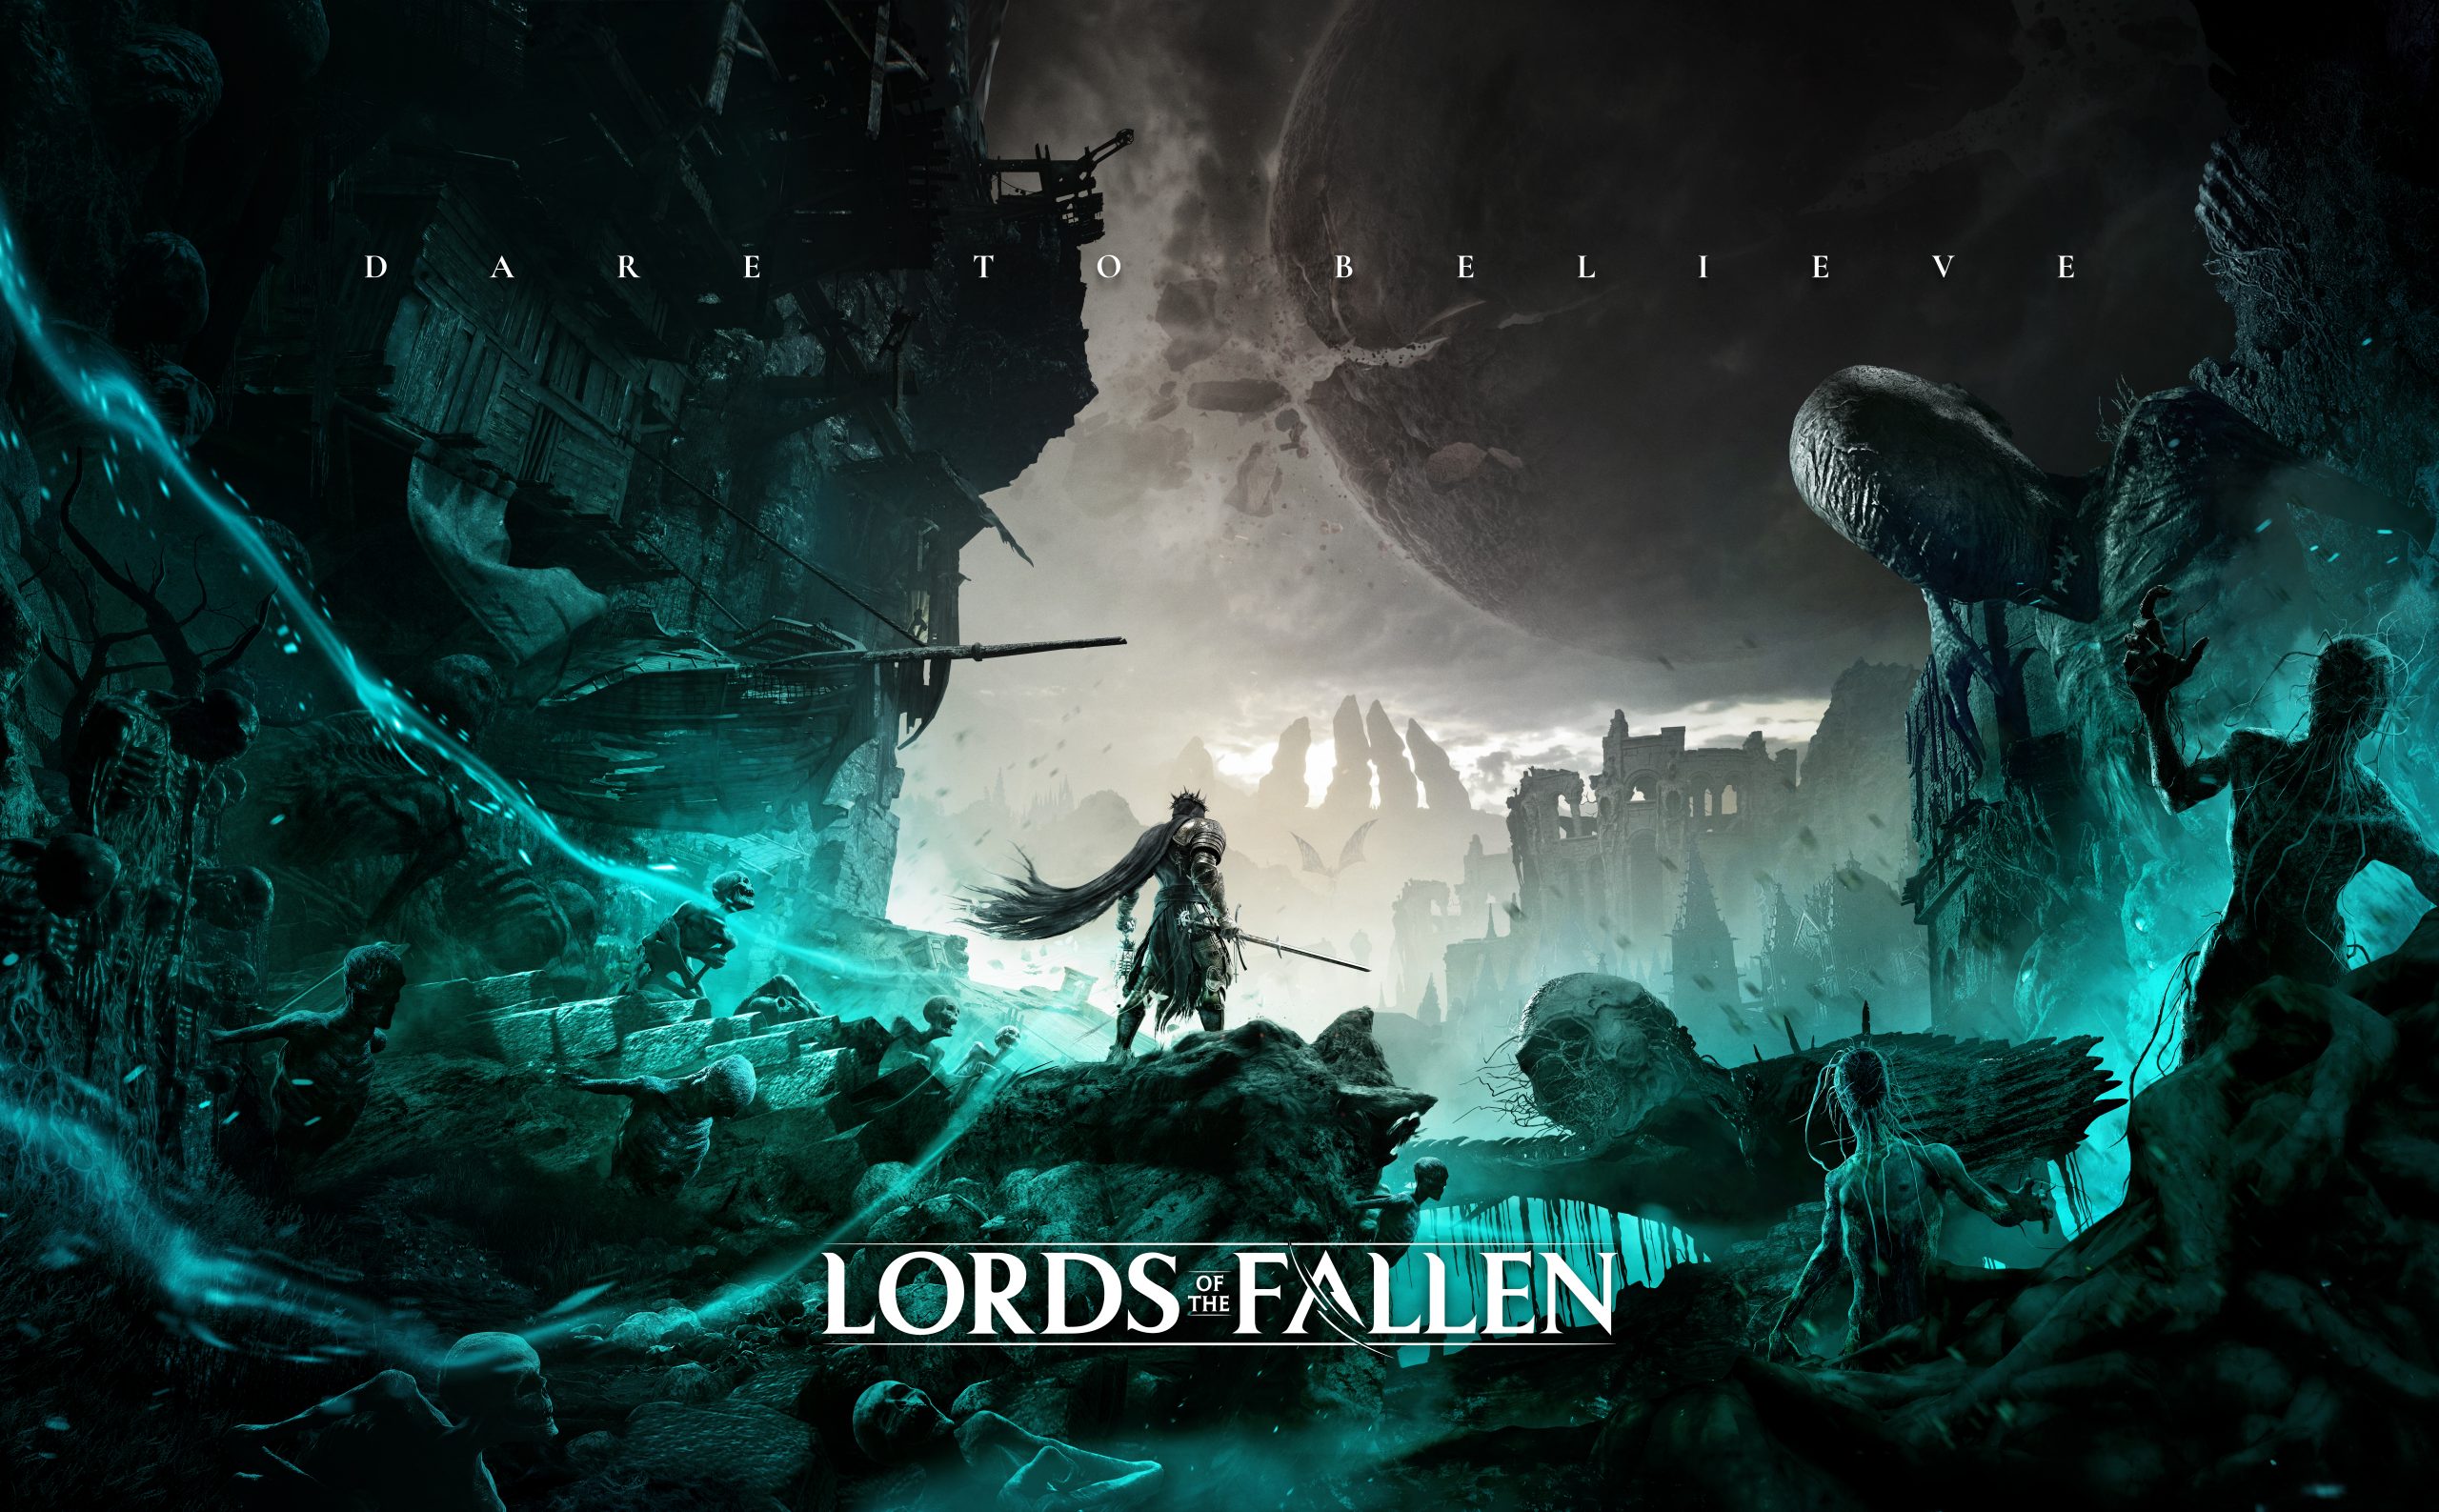 Lords of the Fallen Shares Launch Trailer Ahead of Release This Week